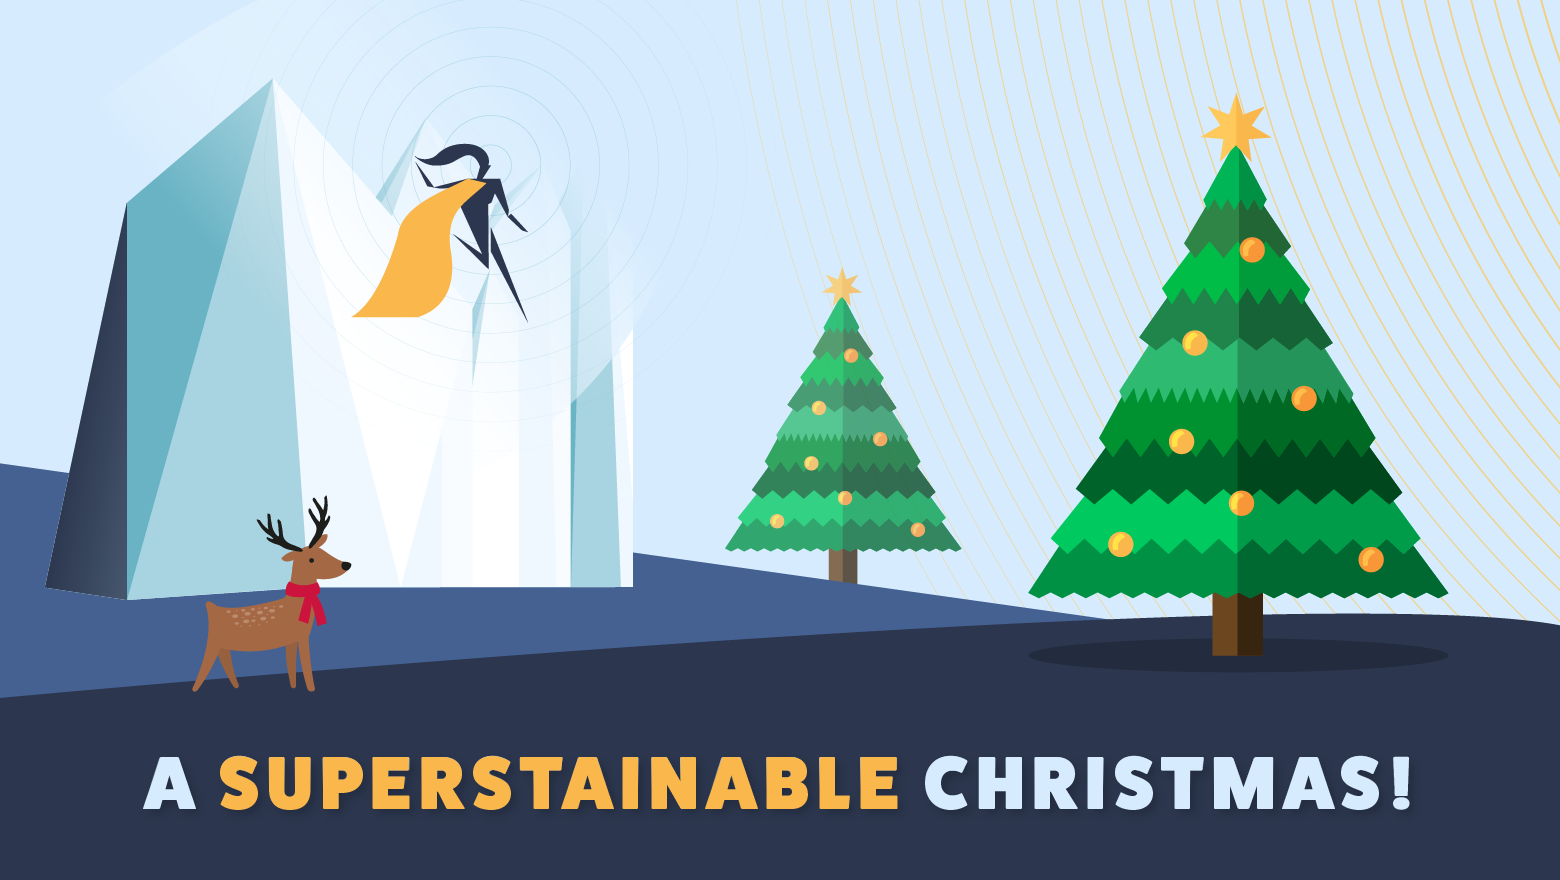 It’s beginning to look a lot like… a supersustainable Christmas!